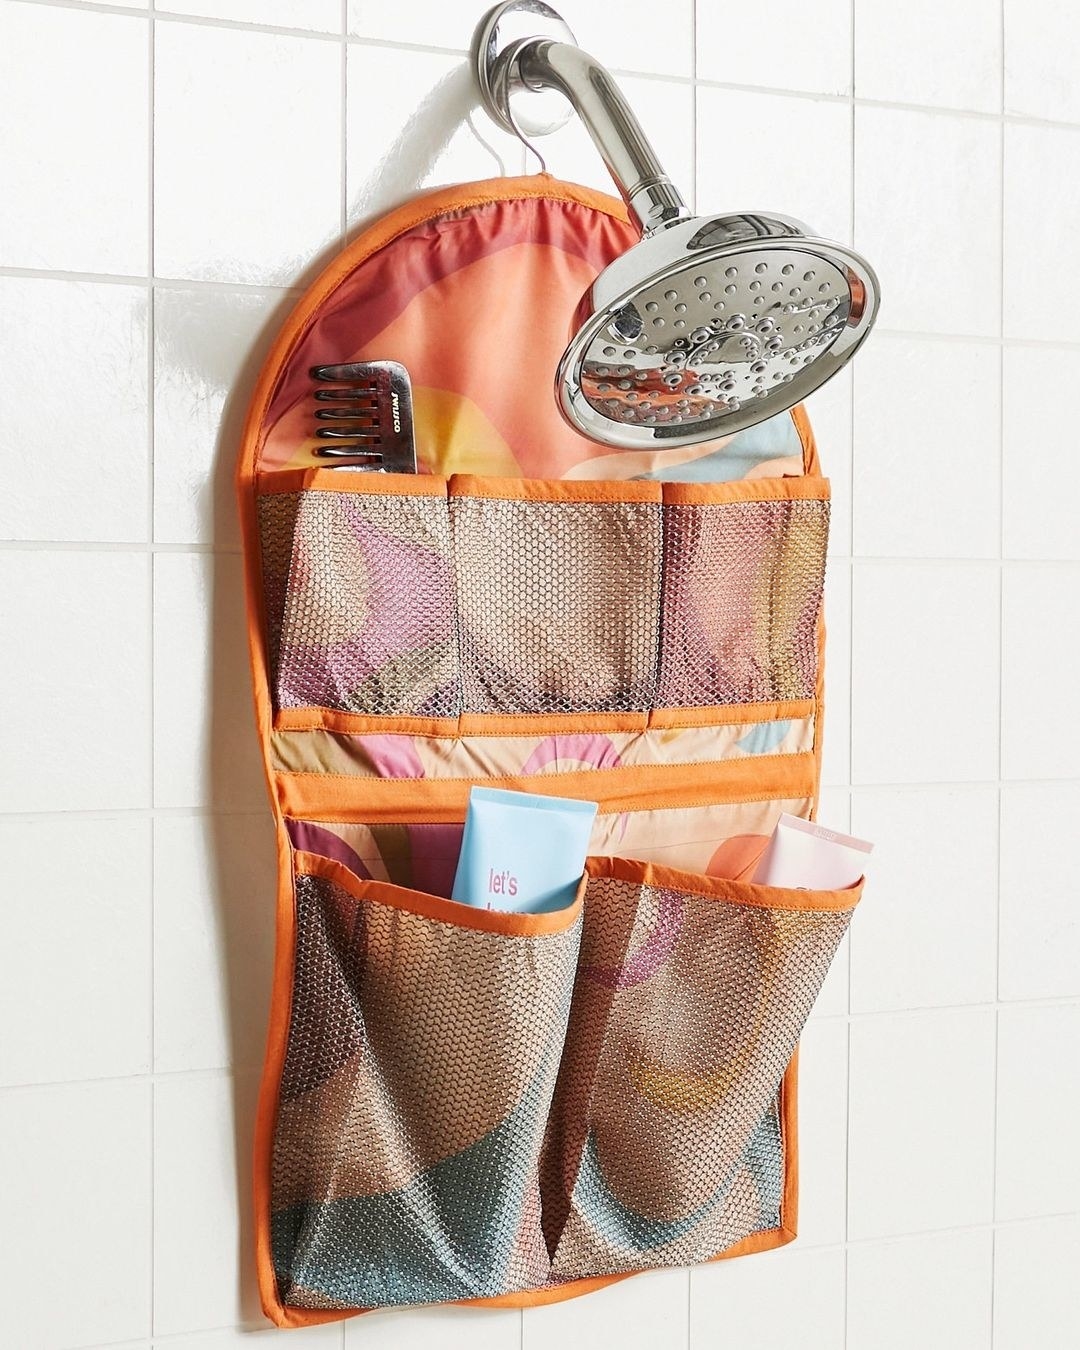 The caddy hanging from a shower head with products in its pockets